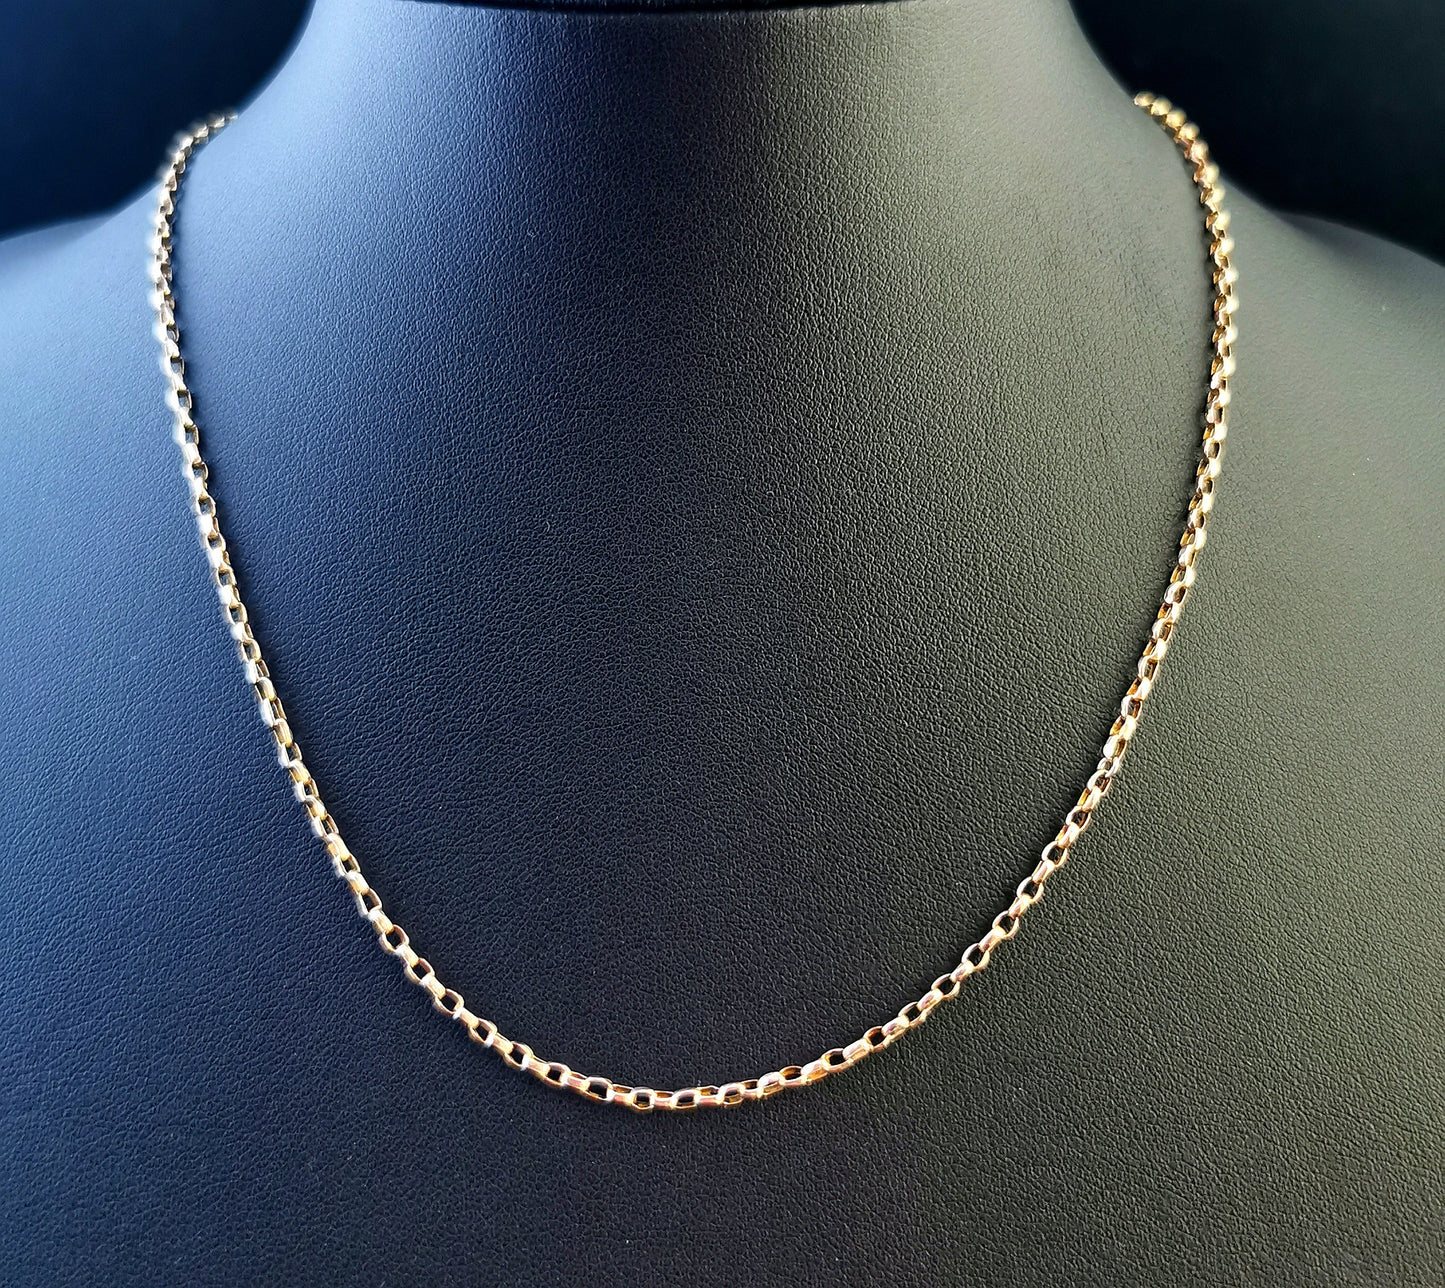 Antique 9ct gold Belcher link chain necklace, yellow gold, Edwardian